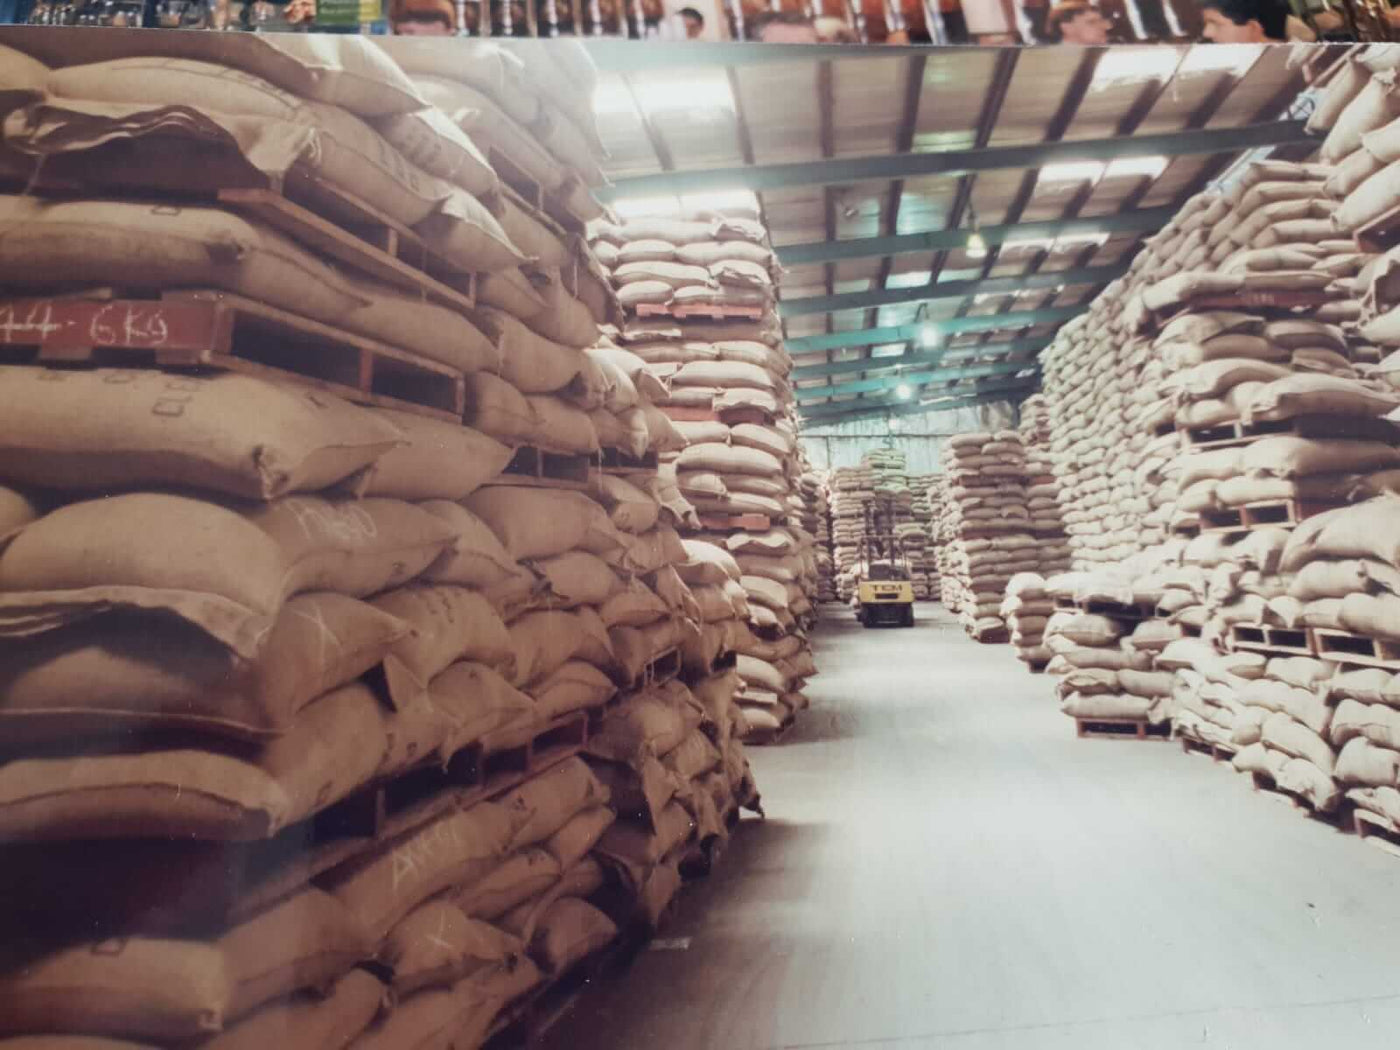 Large coffee warehouse storing pallets of Angco coffee beans.